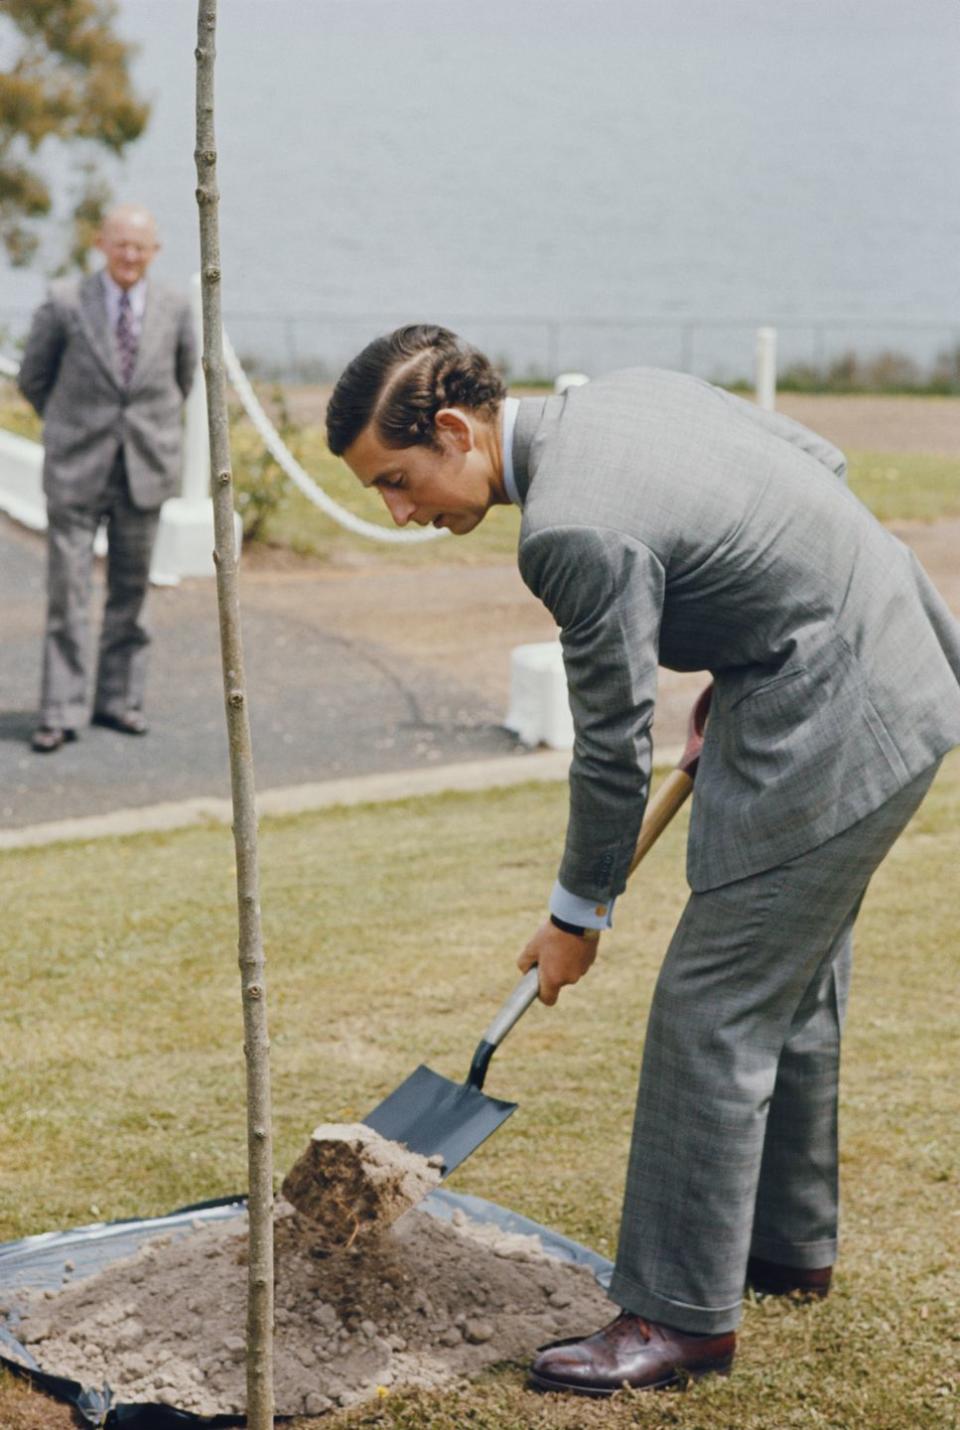 <p>For over 40 years, the King has been a leader in identifying charitable needs. As Prince of Wales, he founded nearly 20 charities and was patron of more than 400. He will be less involved in charitable activities as he takes up his duties as head of state.</p><p>Pictured: A young Prince Charles plants a tree during a tour of Australia, October 1974</p>